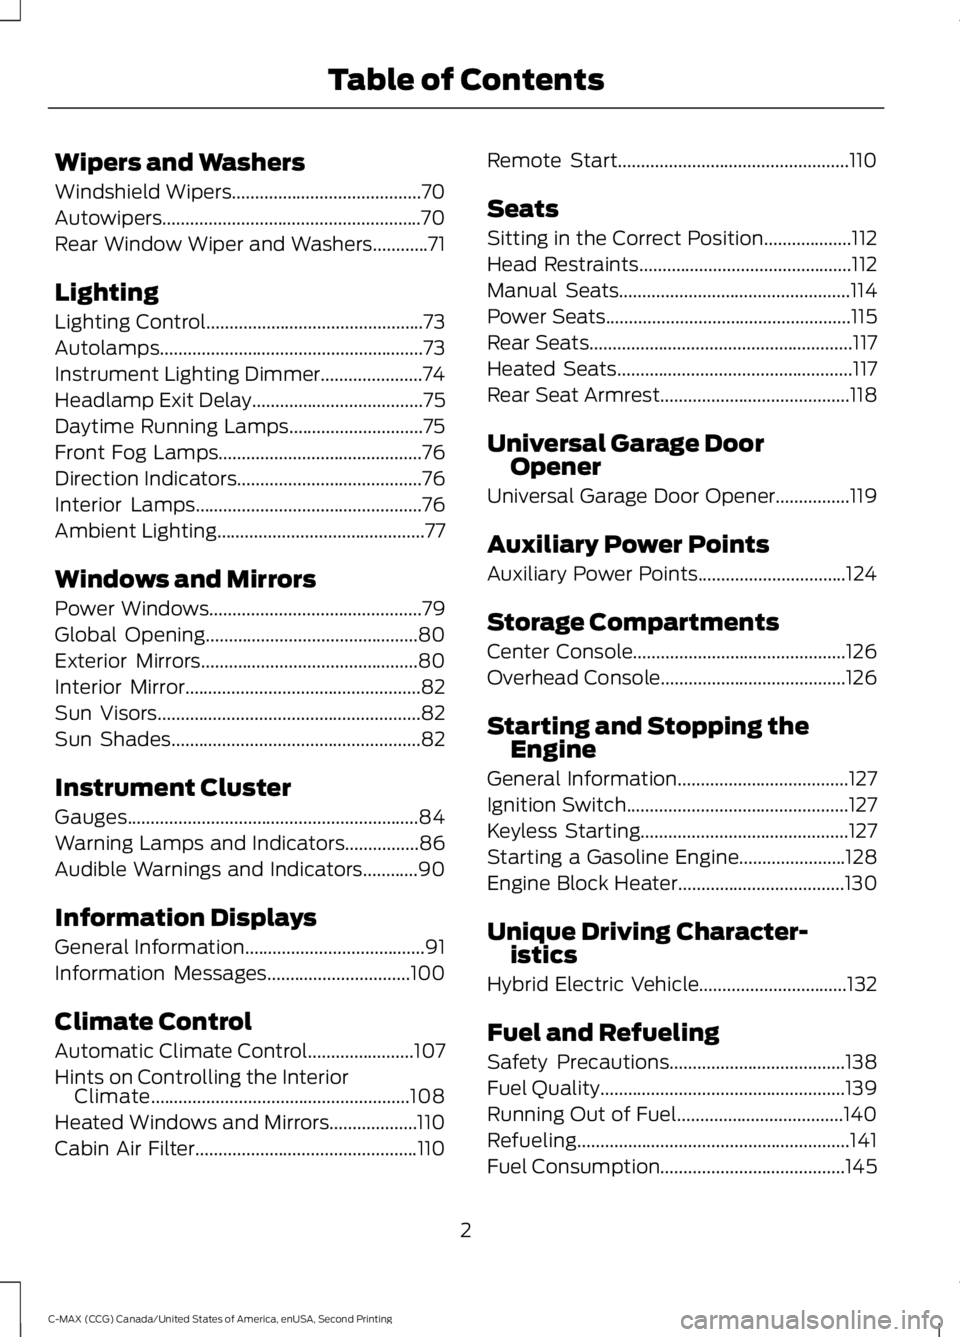 FORD C MAX 2015  Owners Manual Wipers and Washers
Windshield Wipers.........................................70
Autowipers........................................................70
Rear Window Wiper and Washers
............71
Lighti